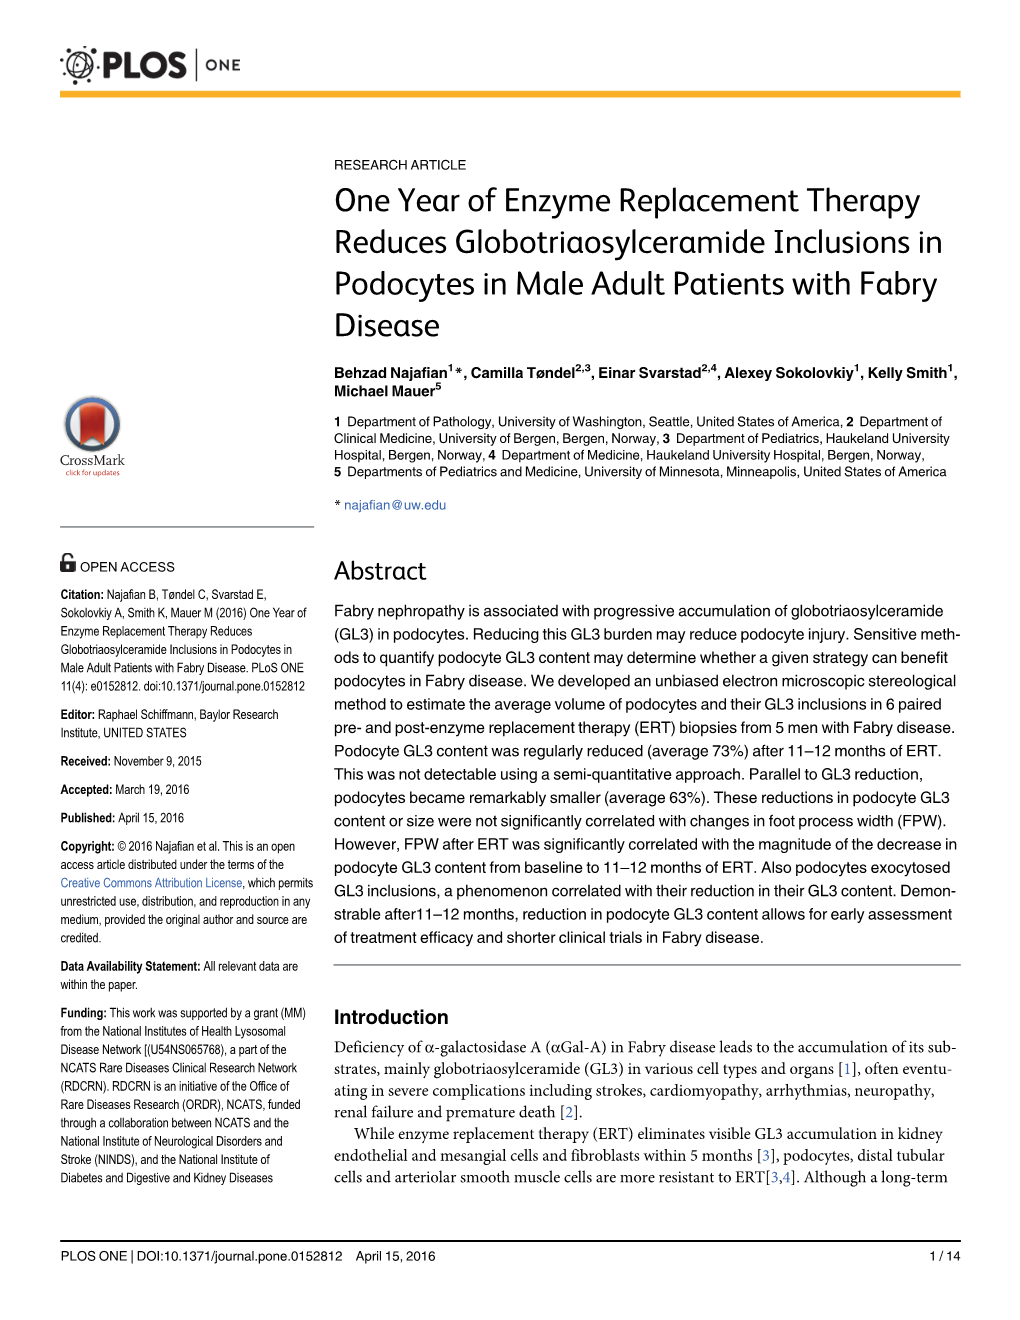 One Year of Enzyme Replacement Therapy Reduces Globotriaosylceramide Inclusions in Podocytes in Male Adult Patients with Fabry Disease